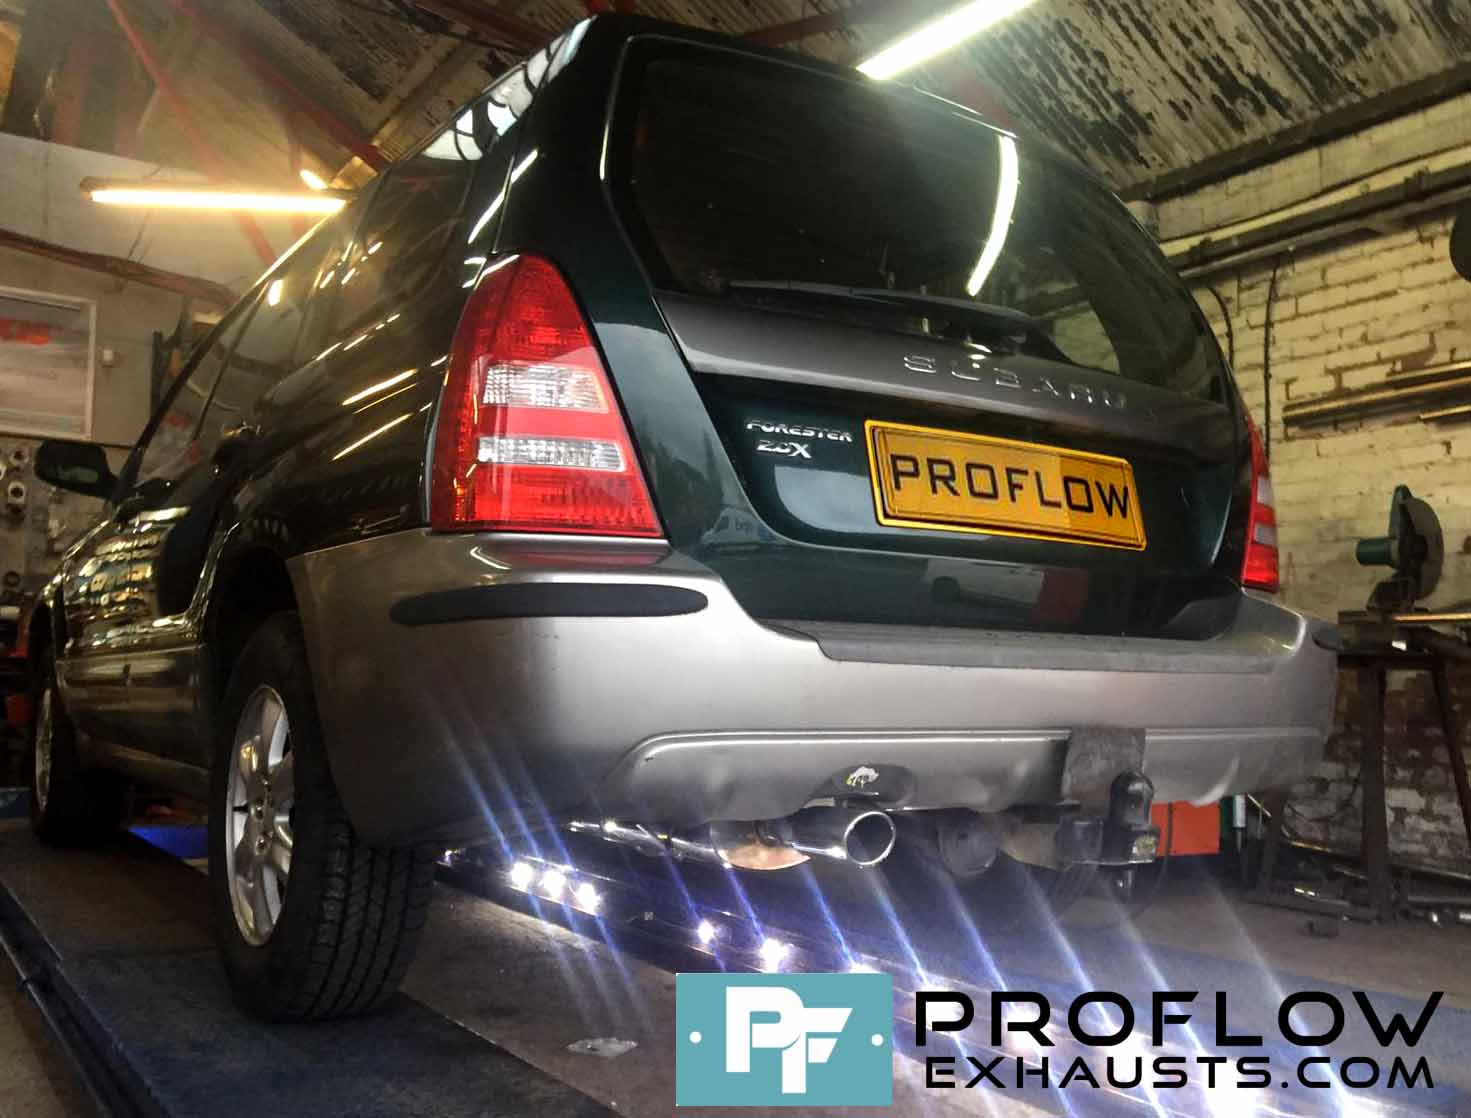 Proflow custom built Exhaust System for Subaru Forester